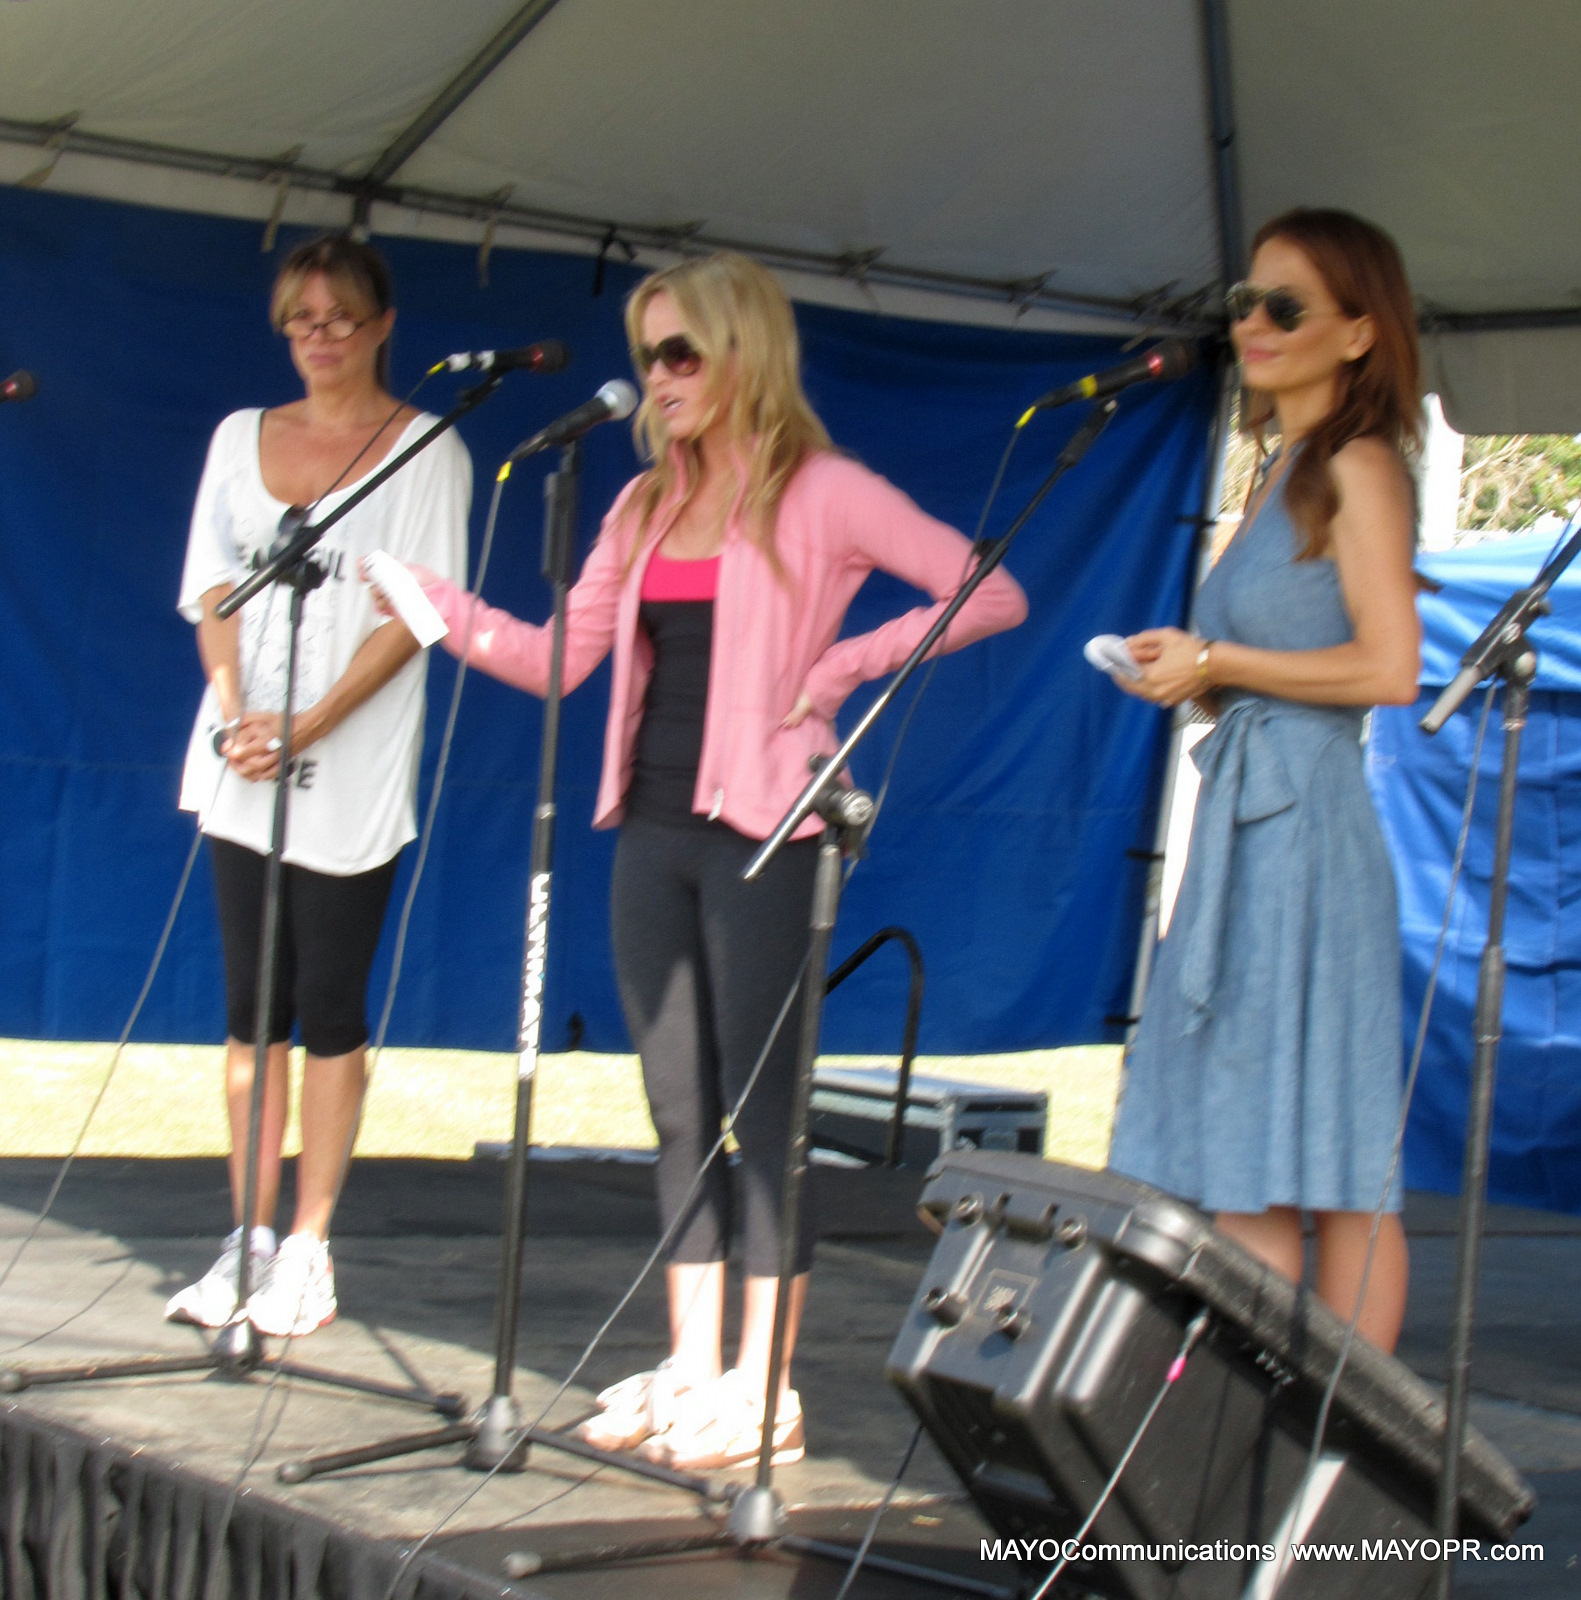 Nancy Lee Grahn, Julie Berman and Lisa LoCicero (General Hospital) kick of the American Cancer Society's Relay for Life, Hollywood, Ca.